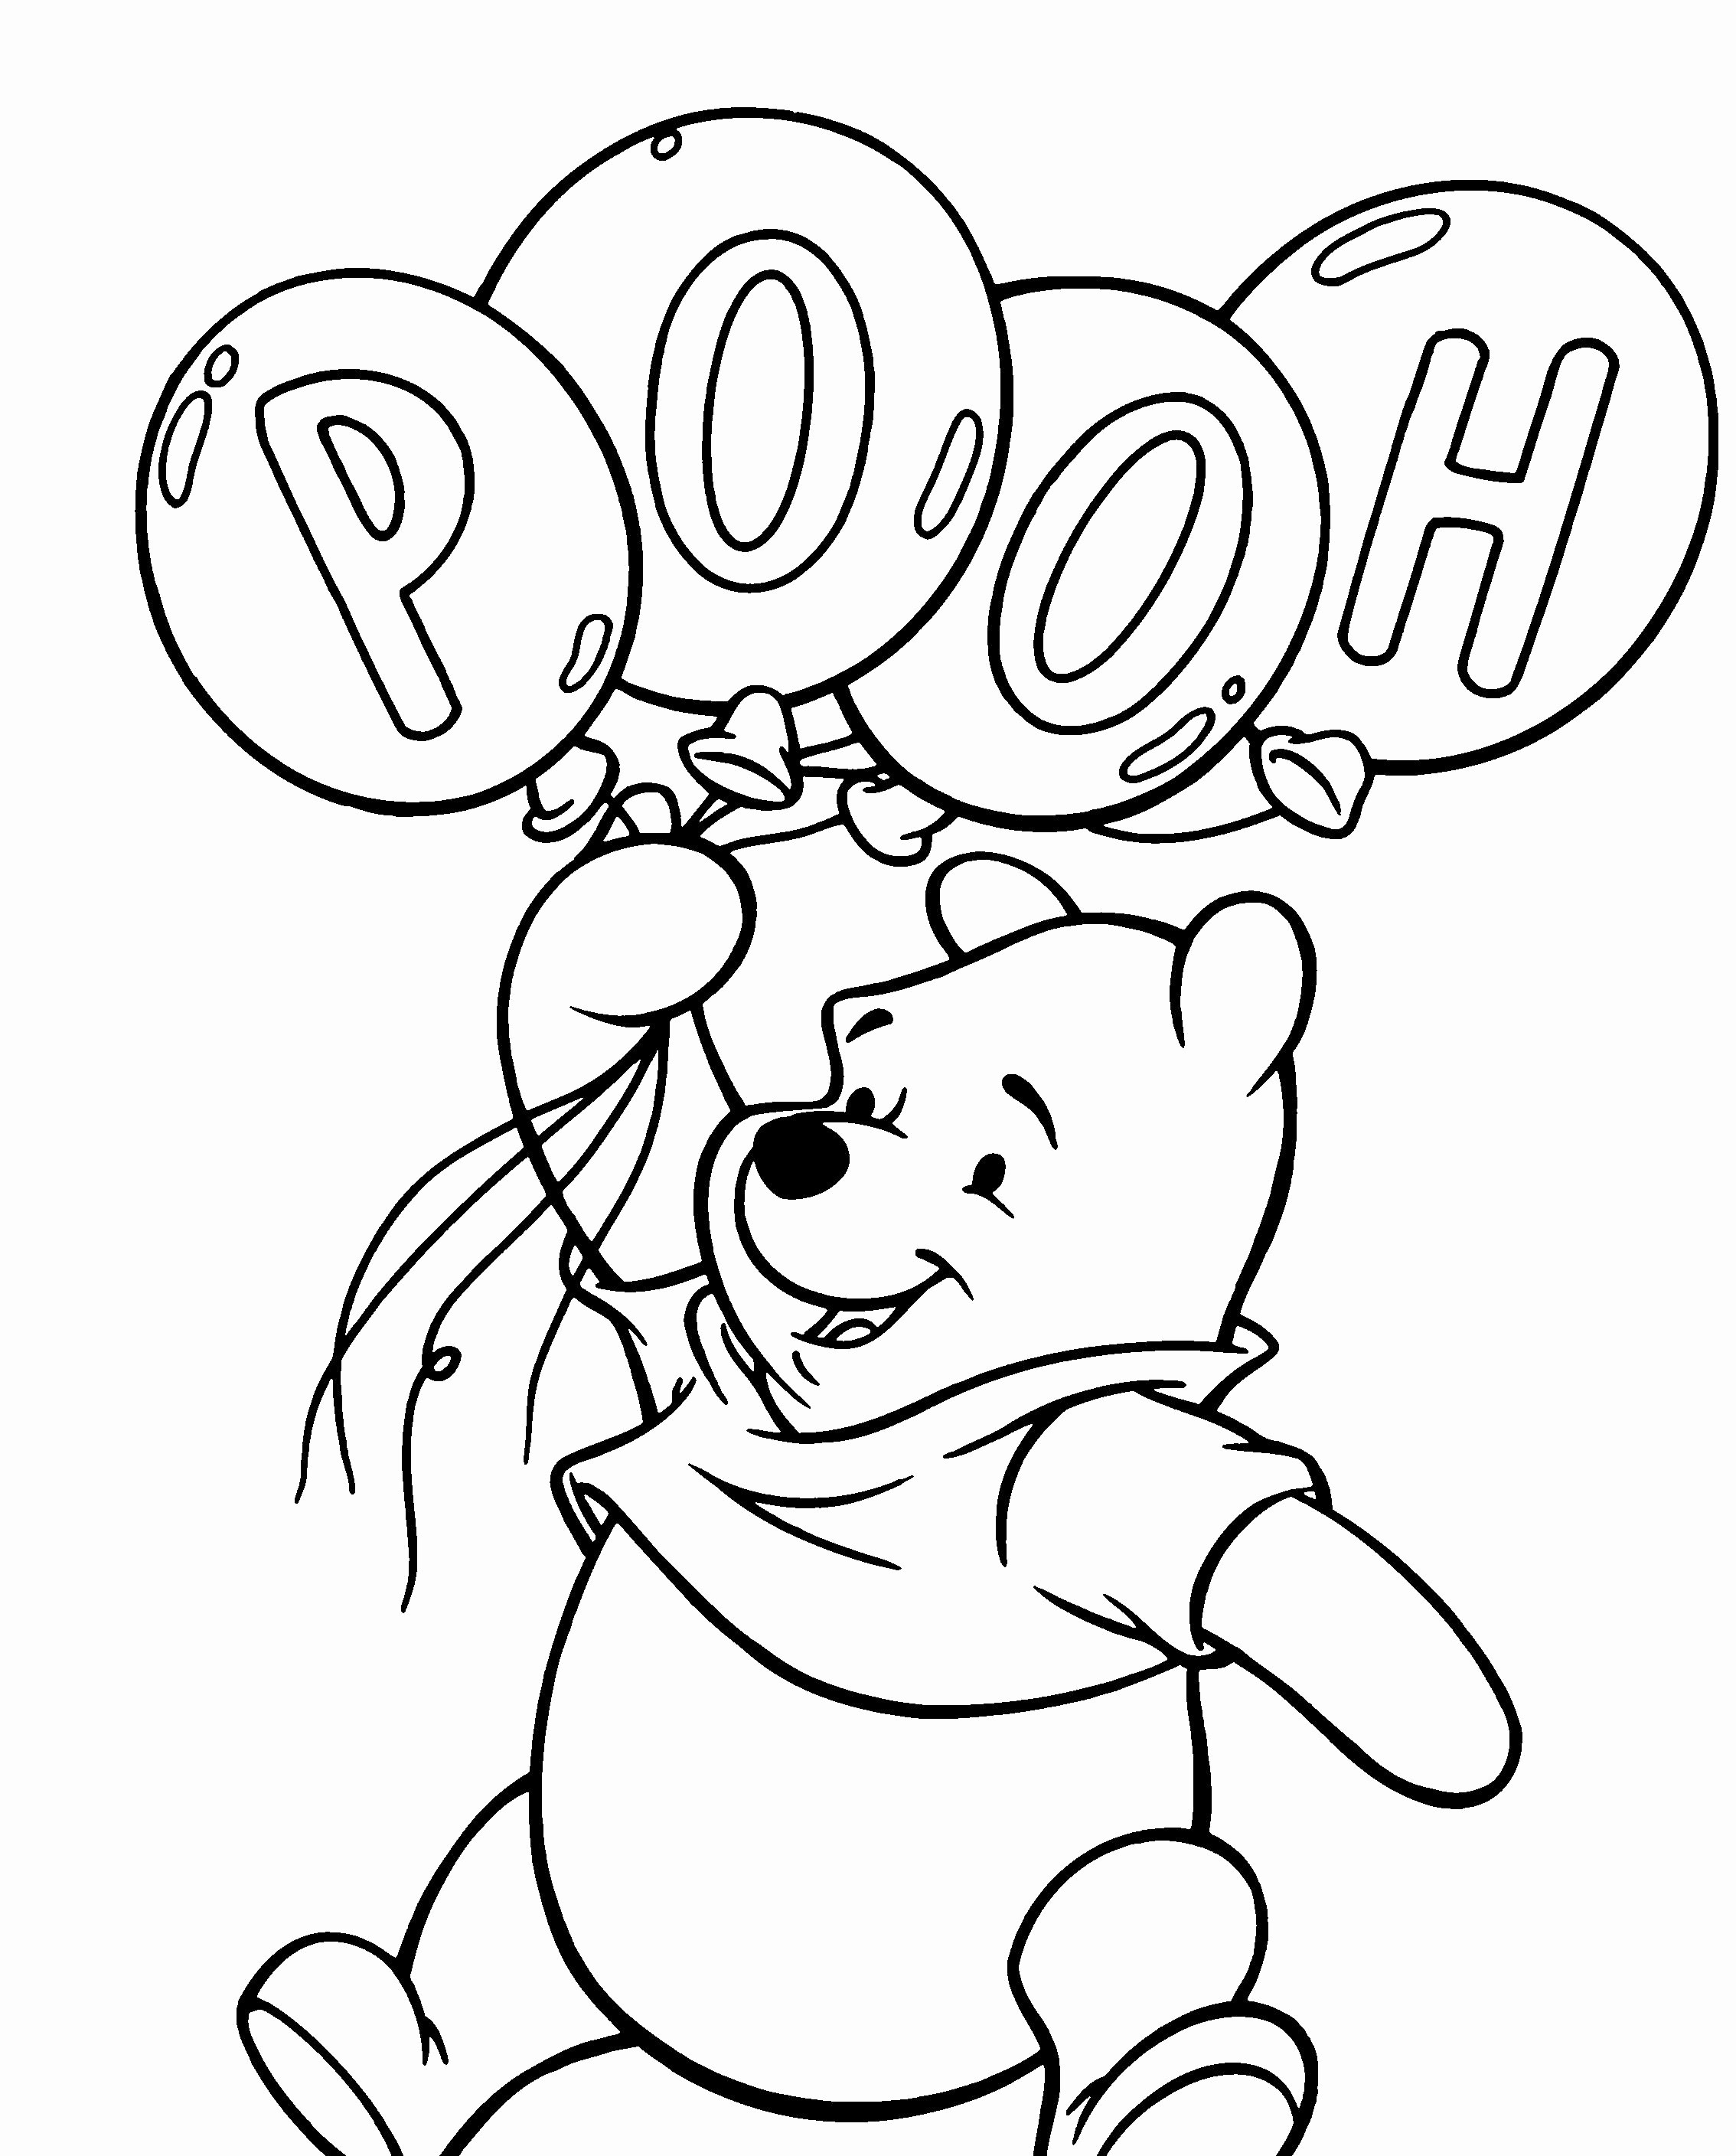 Winnie The Pooh Coloring Pages Online Collection Winnie The Pooh Christmas Coloring Pages Pictures